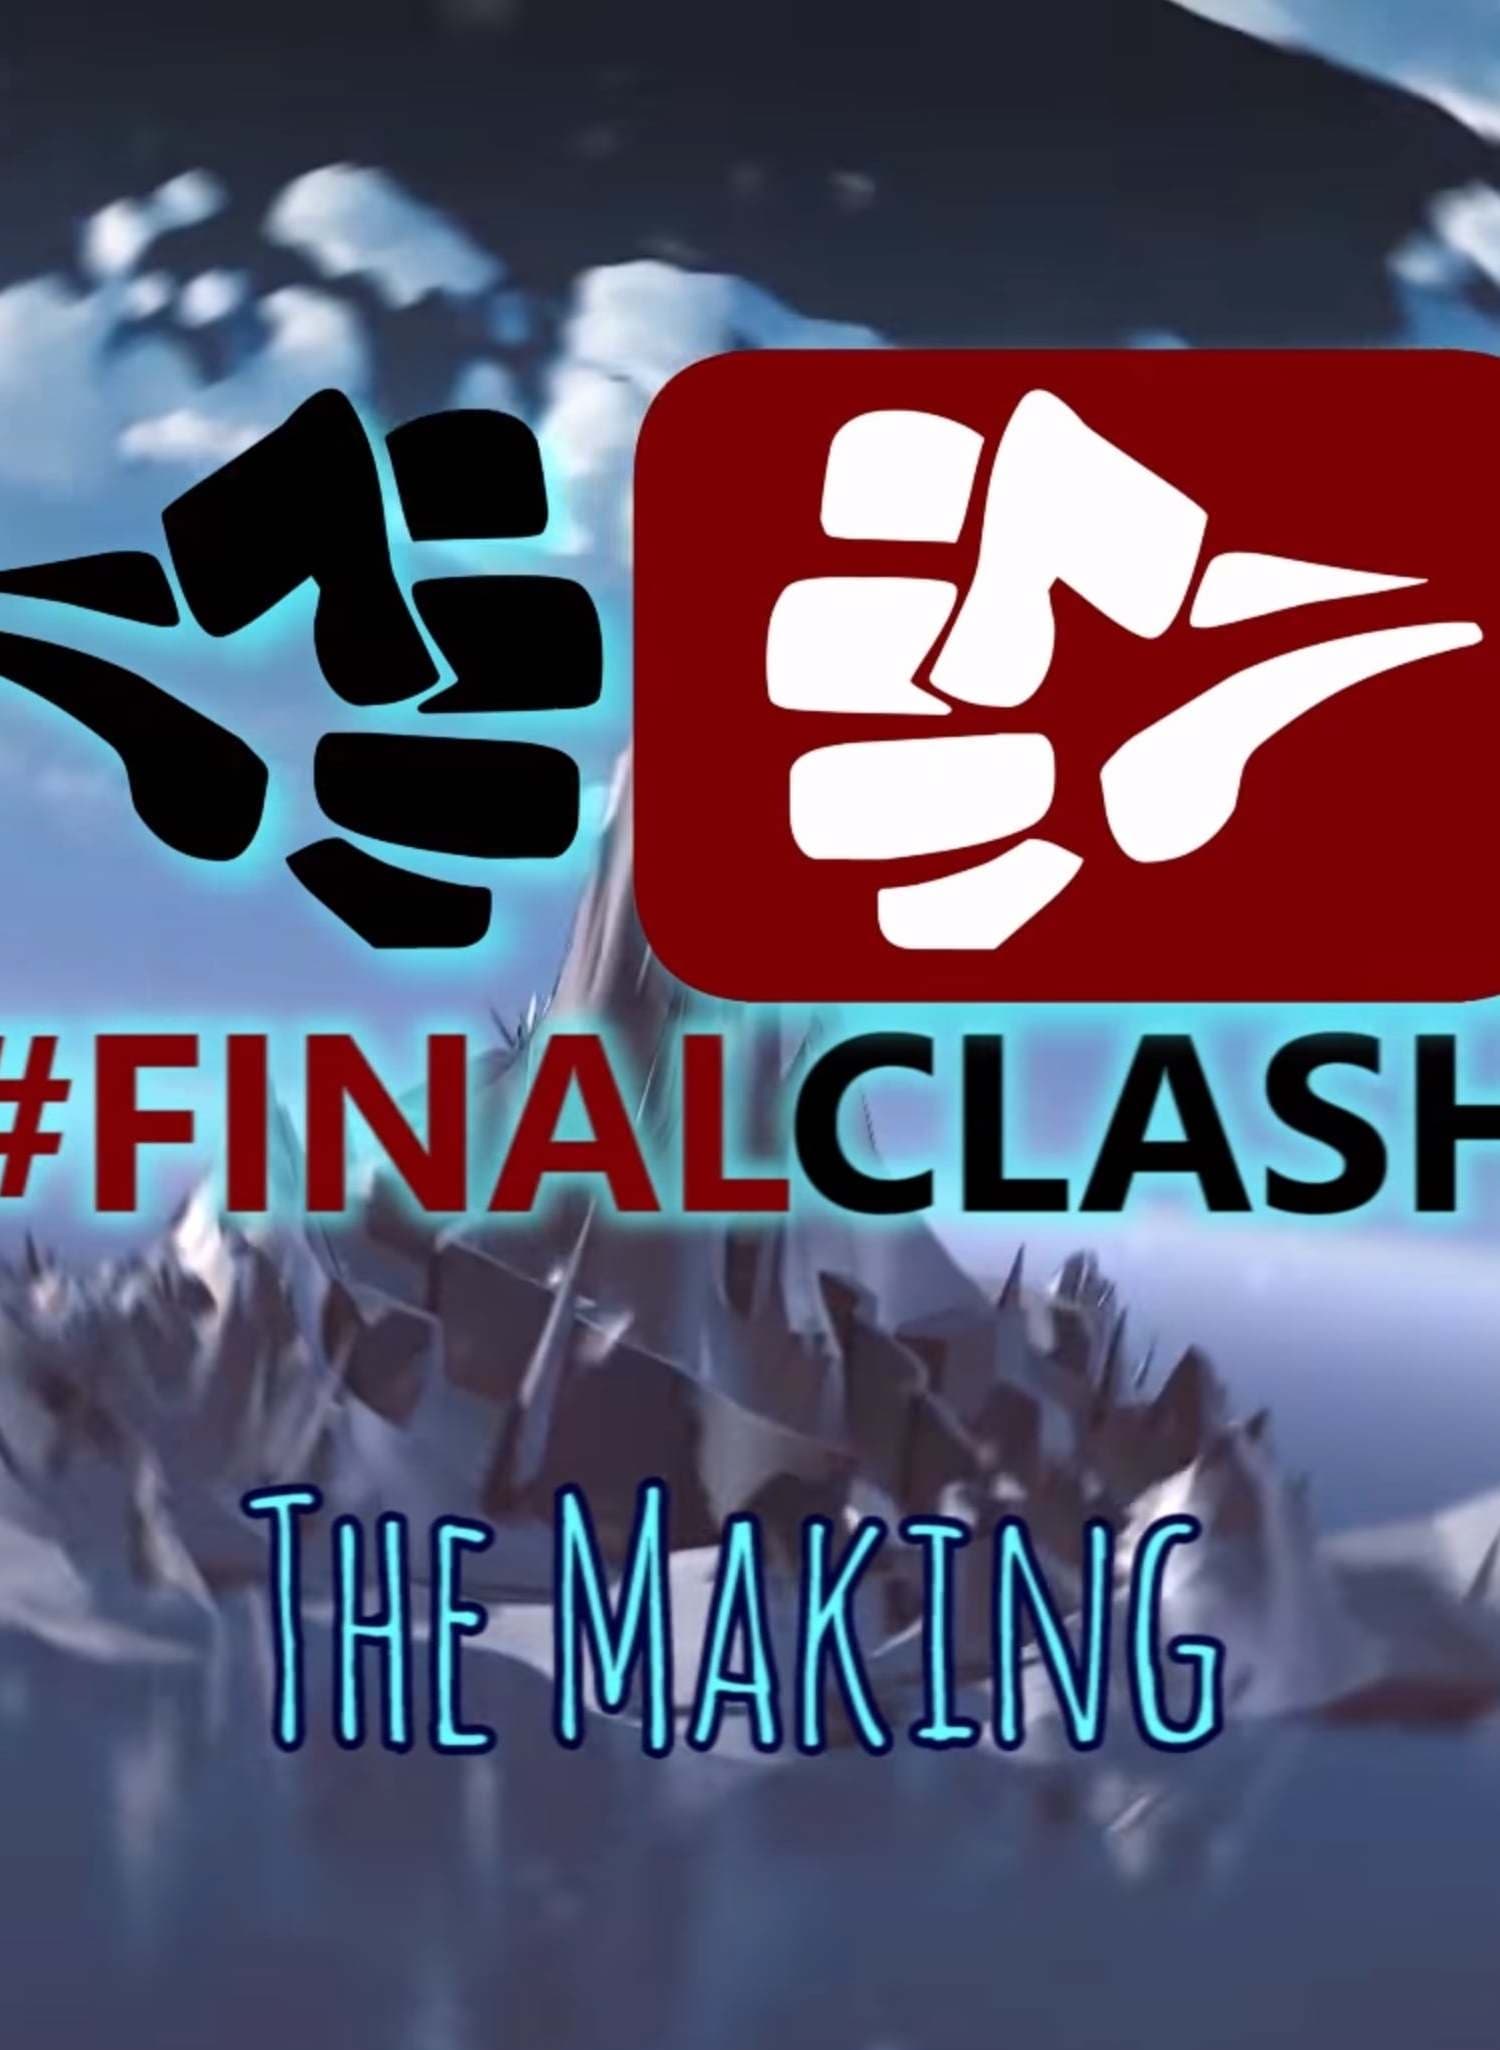 #FinalClash - The Making